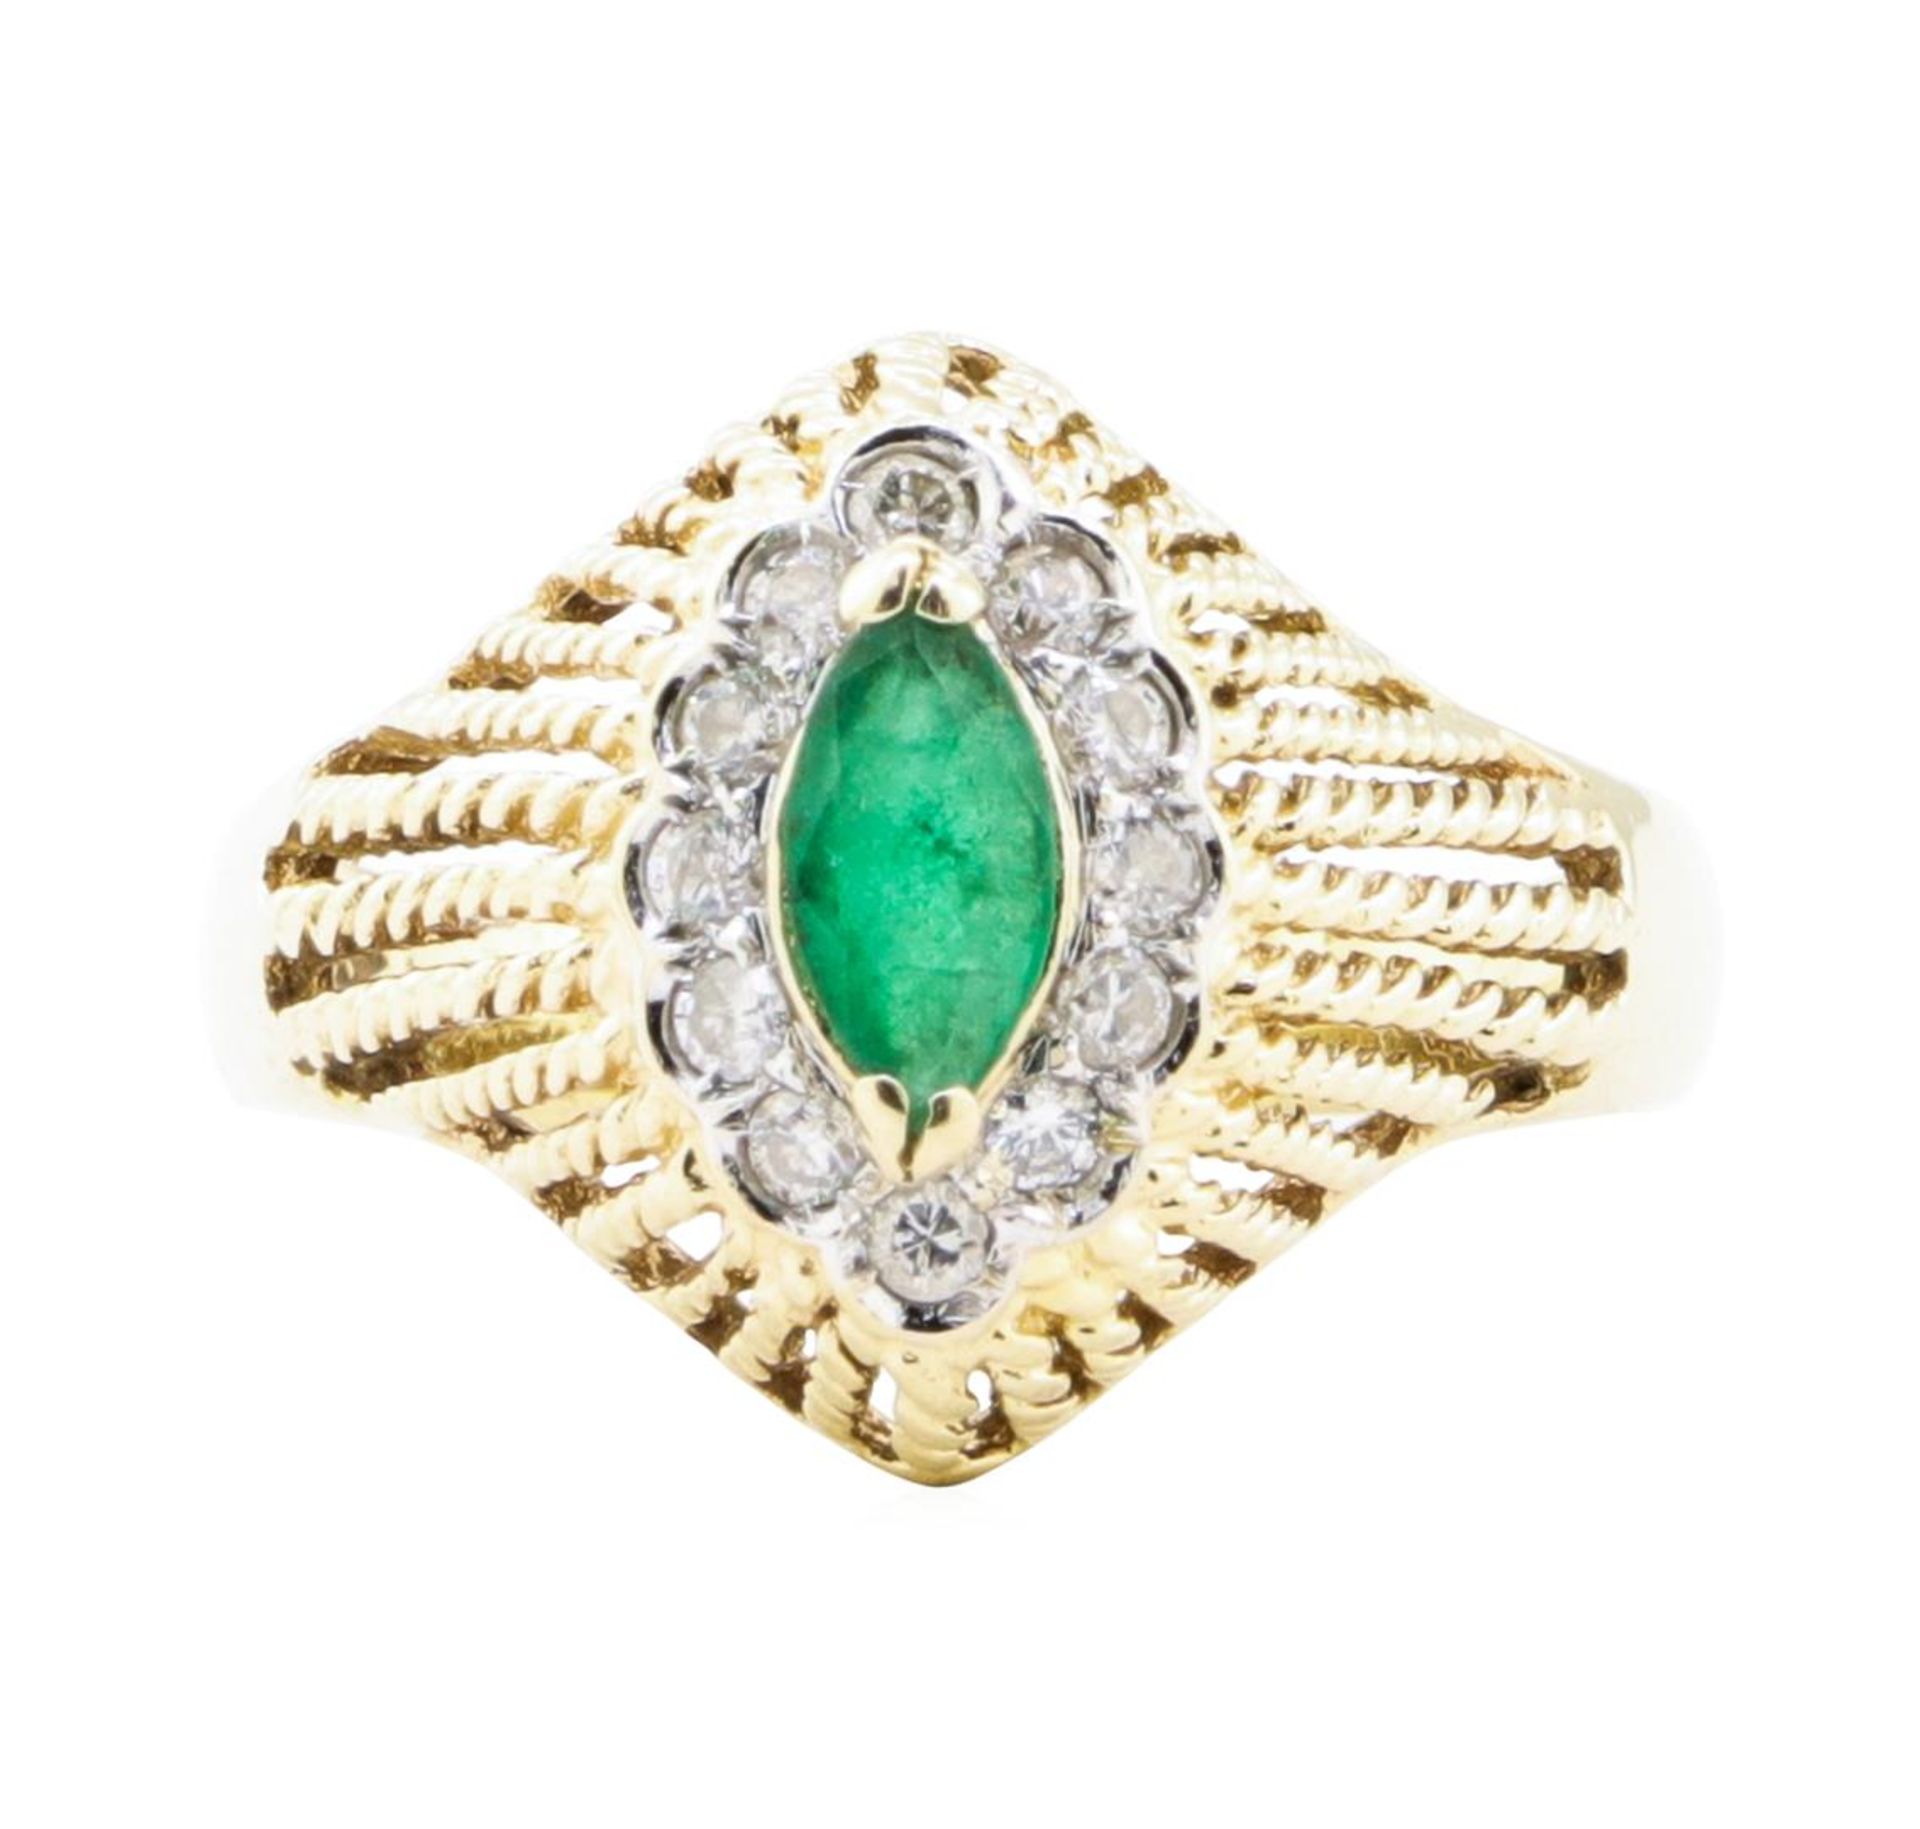 0.65 ctw Emerald And Diamond Ring - 14KT Yellow And White Gold - Image 2 of 5